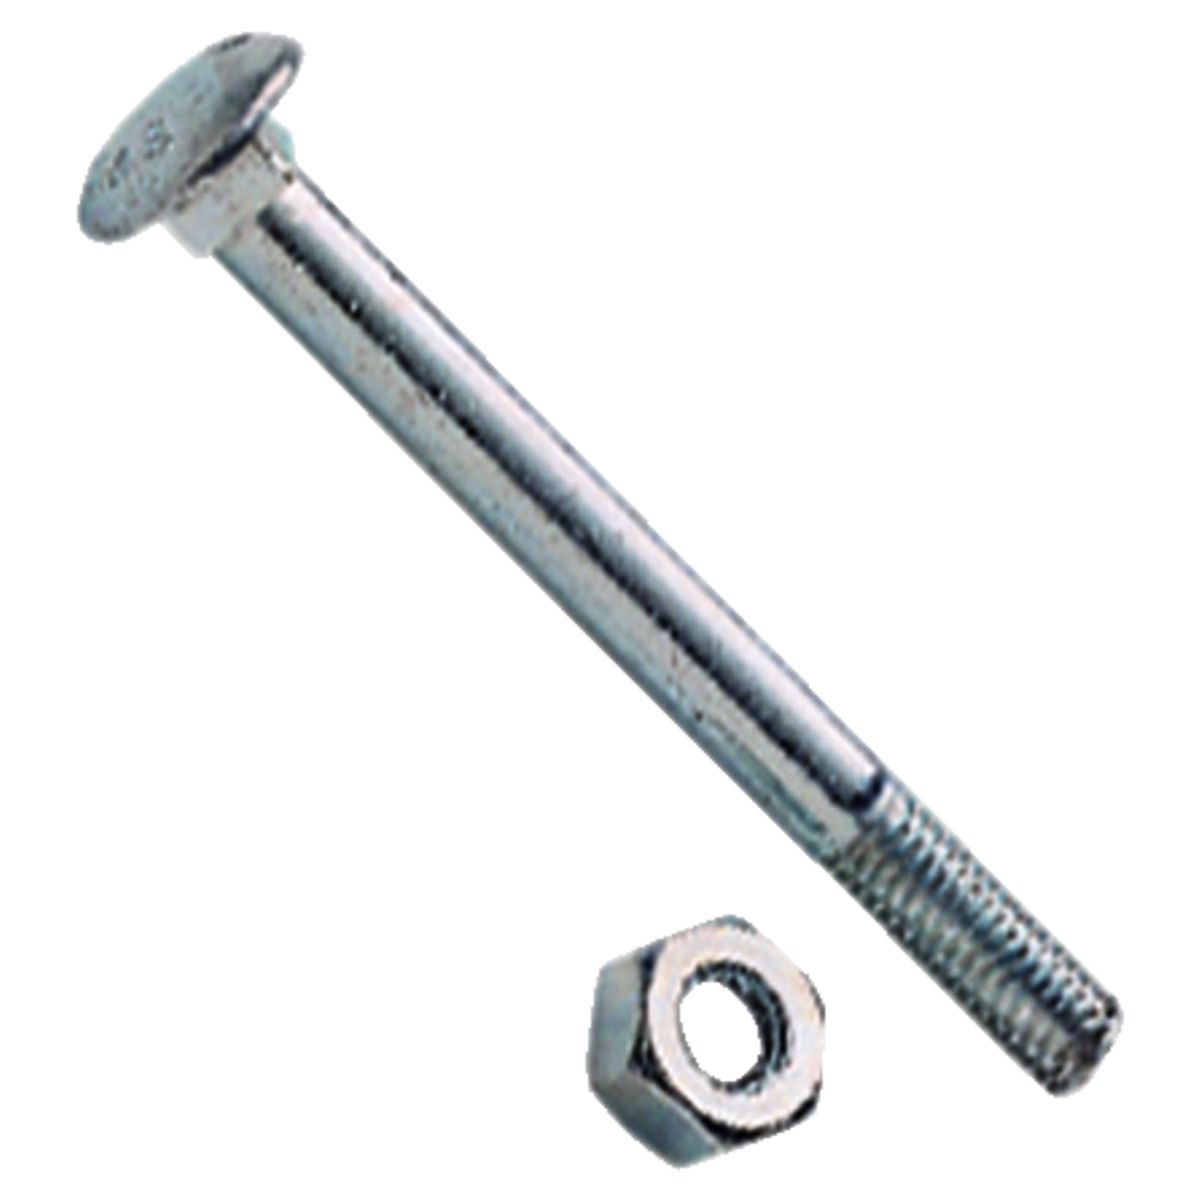 Image of Wickes Carriage Bolt Nut & Washer - M10 x 100mm Pack of 6